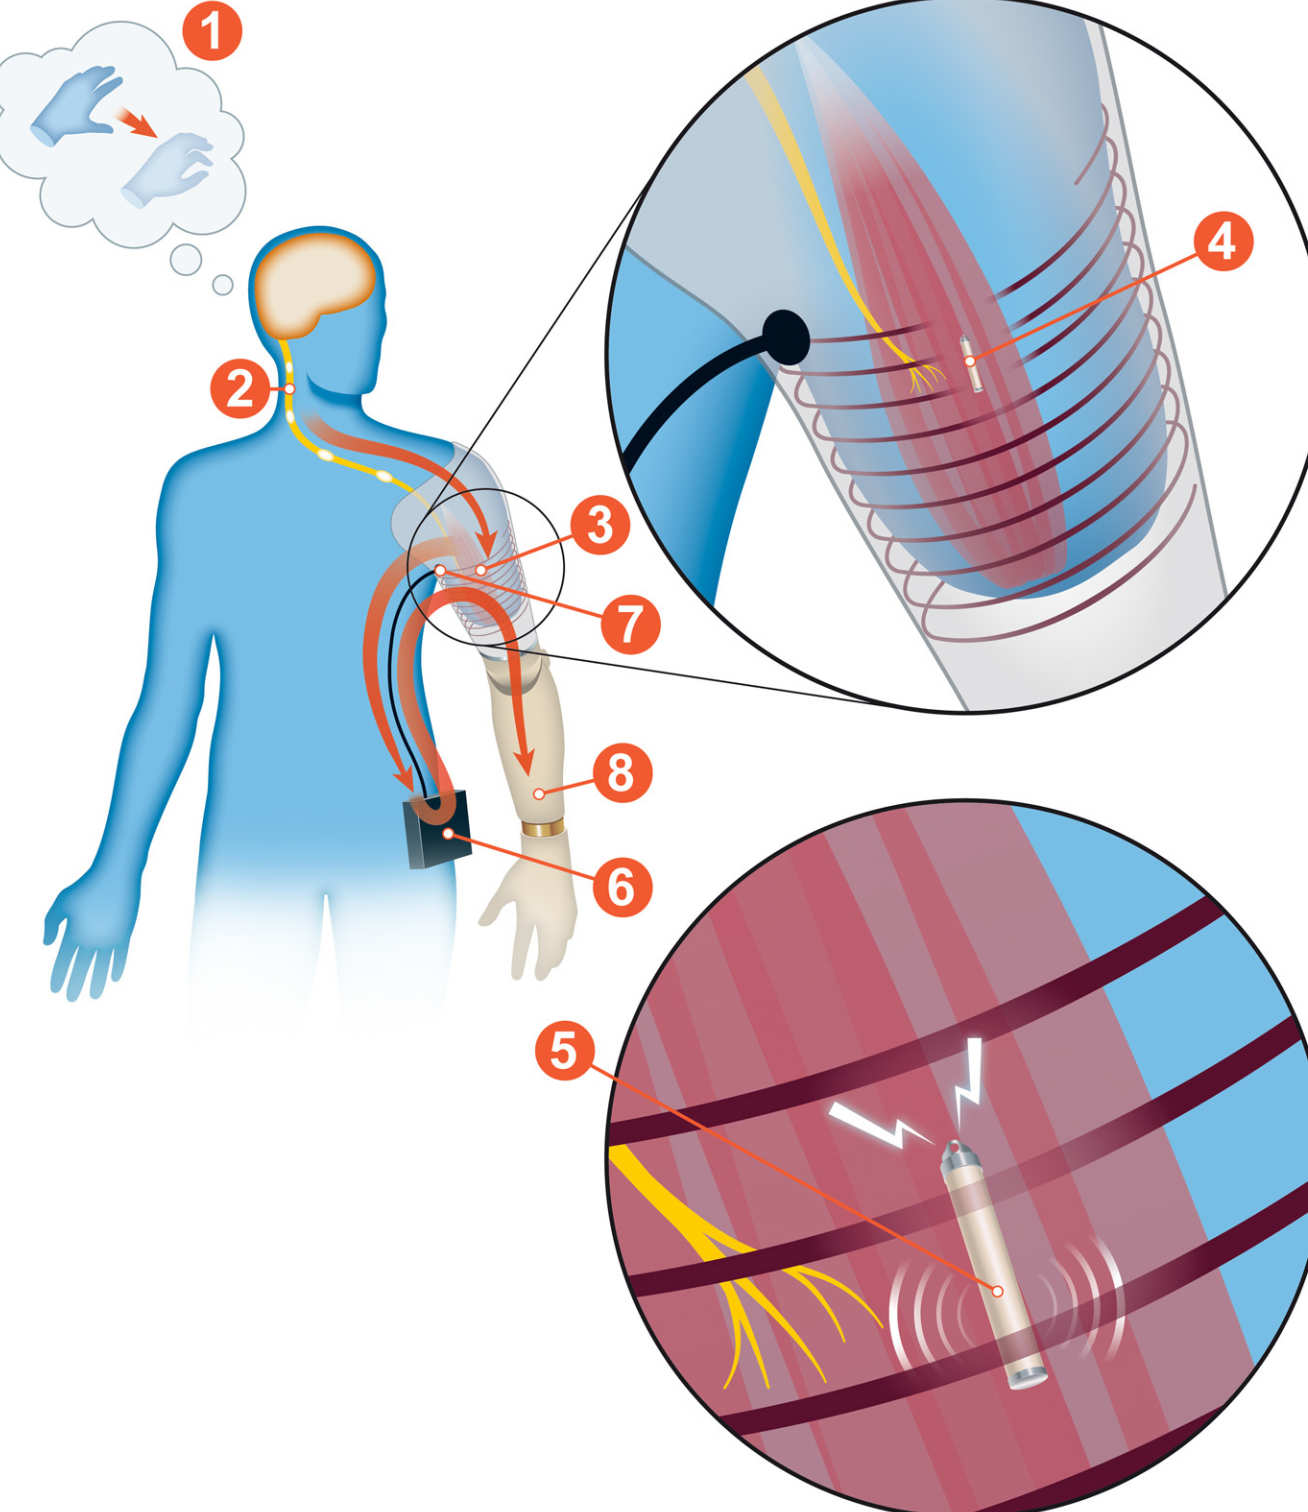 Drawn infographic of what the technology looks like. The electrodes, nerve transfer tech, and stump can be seen.